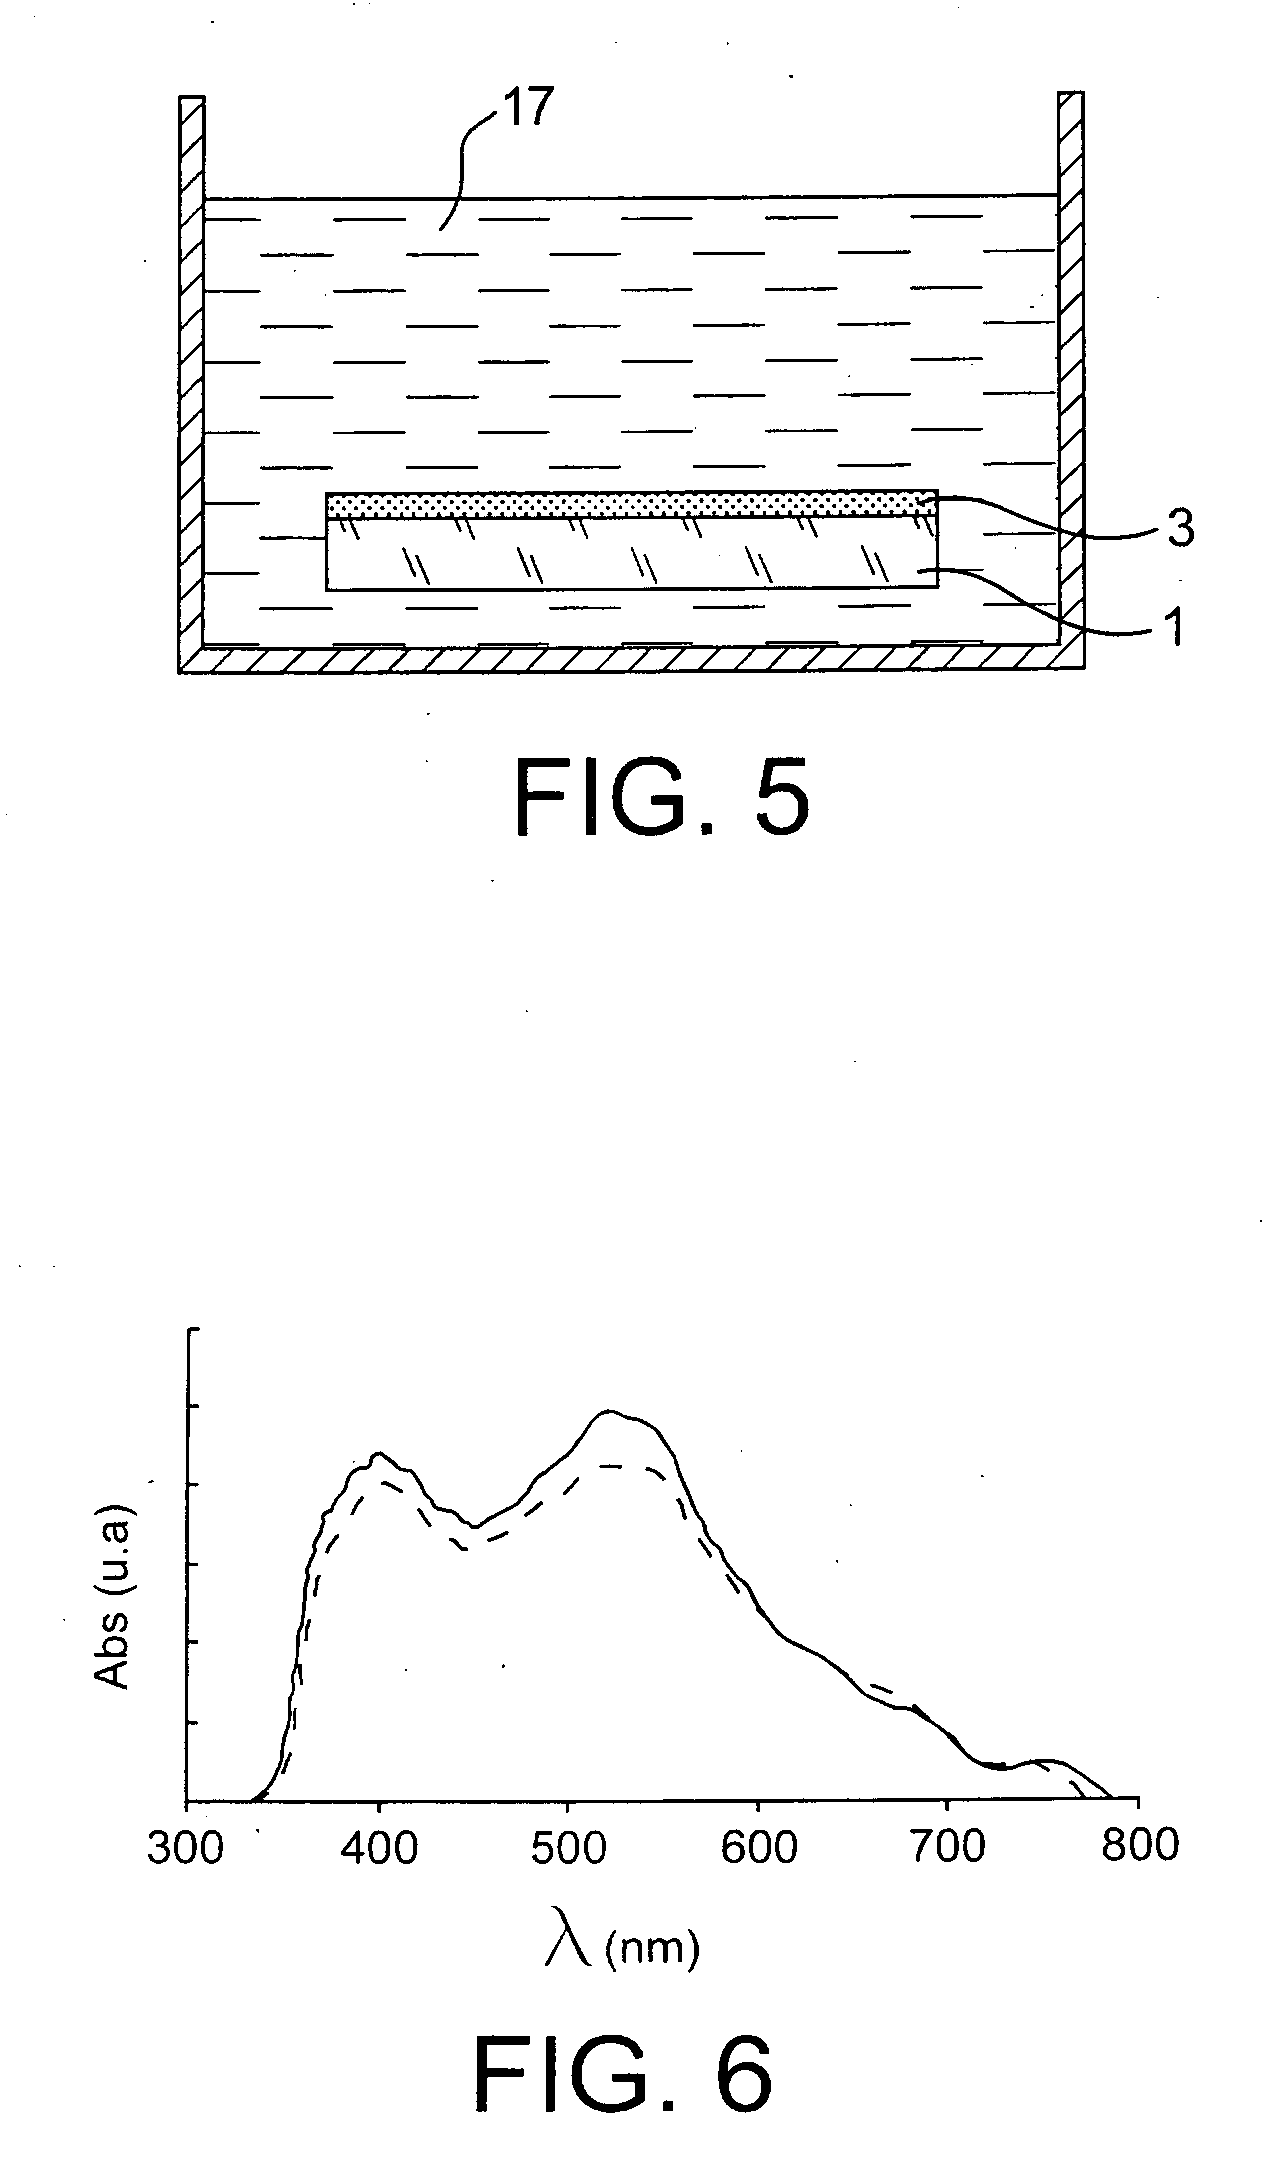 Process for producing thin photosensitized semiconducting films